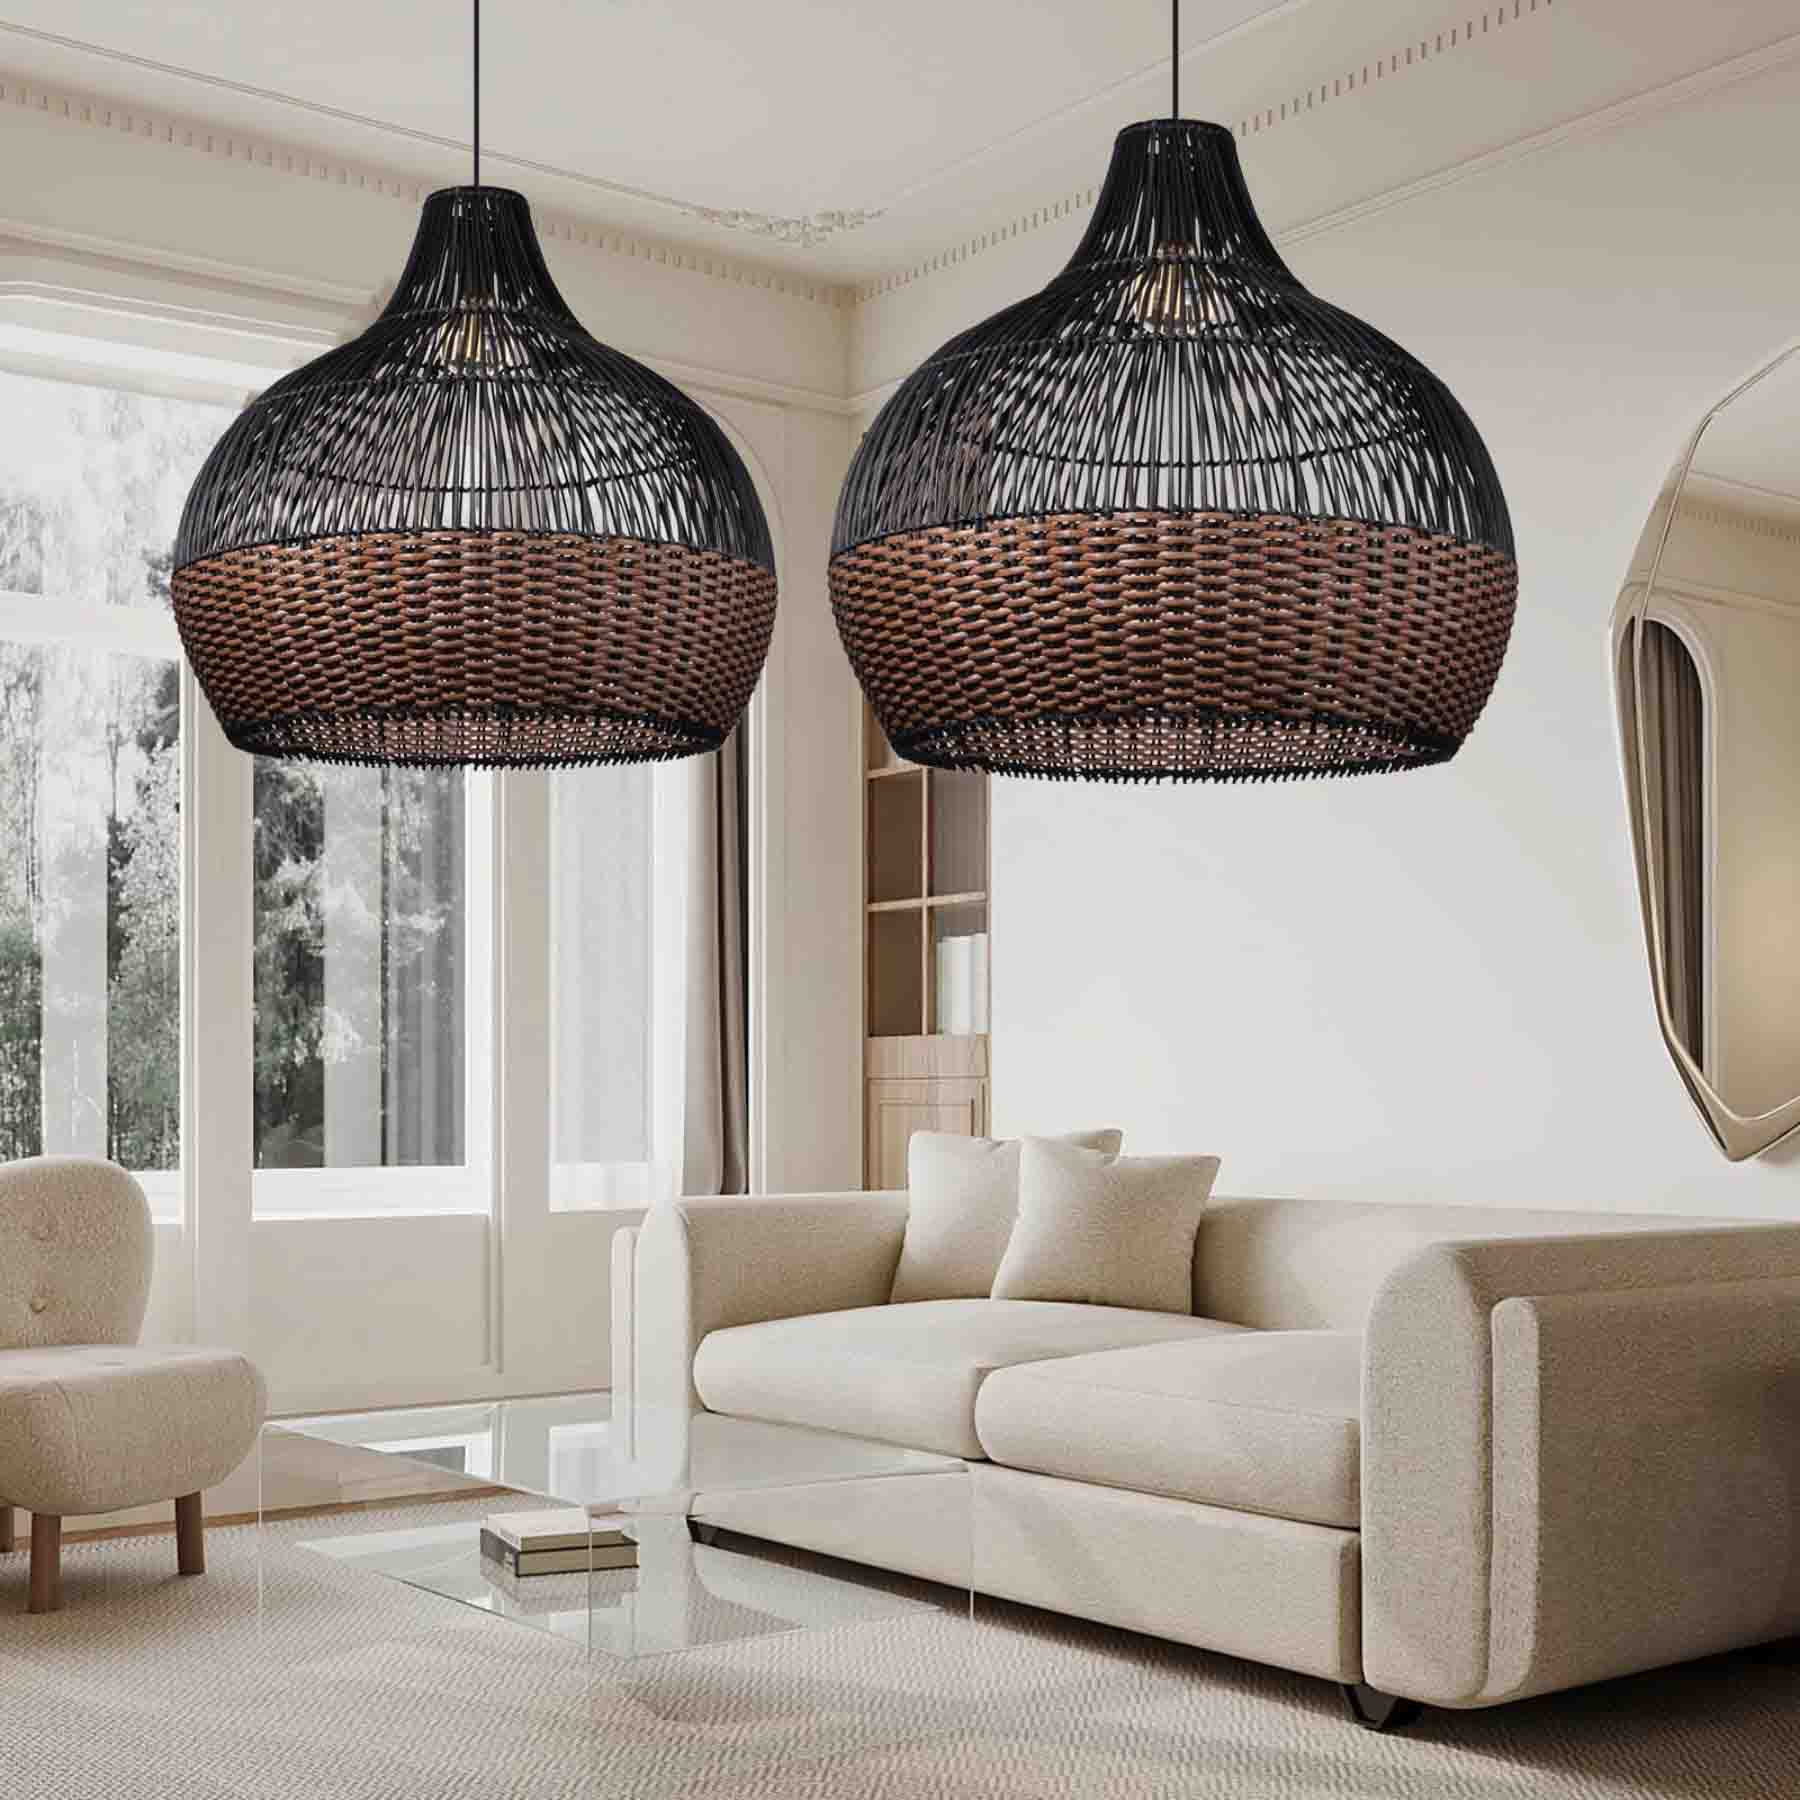 a pendant light features a single bulb mounted on the ceiling